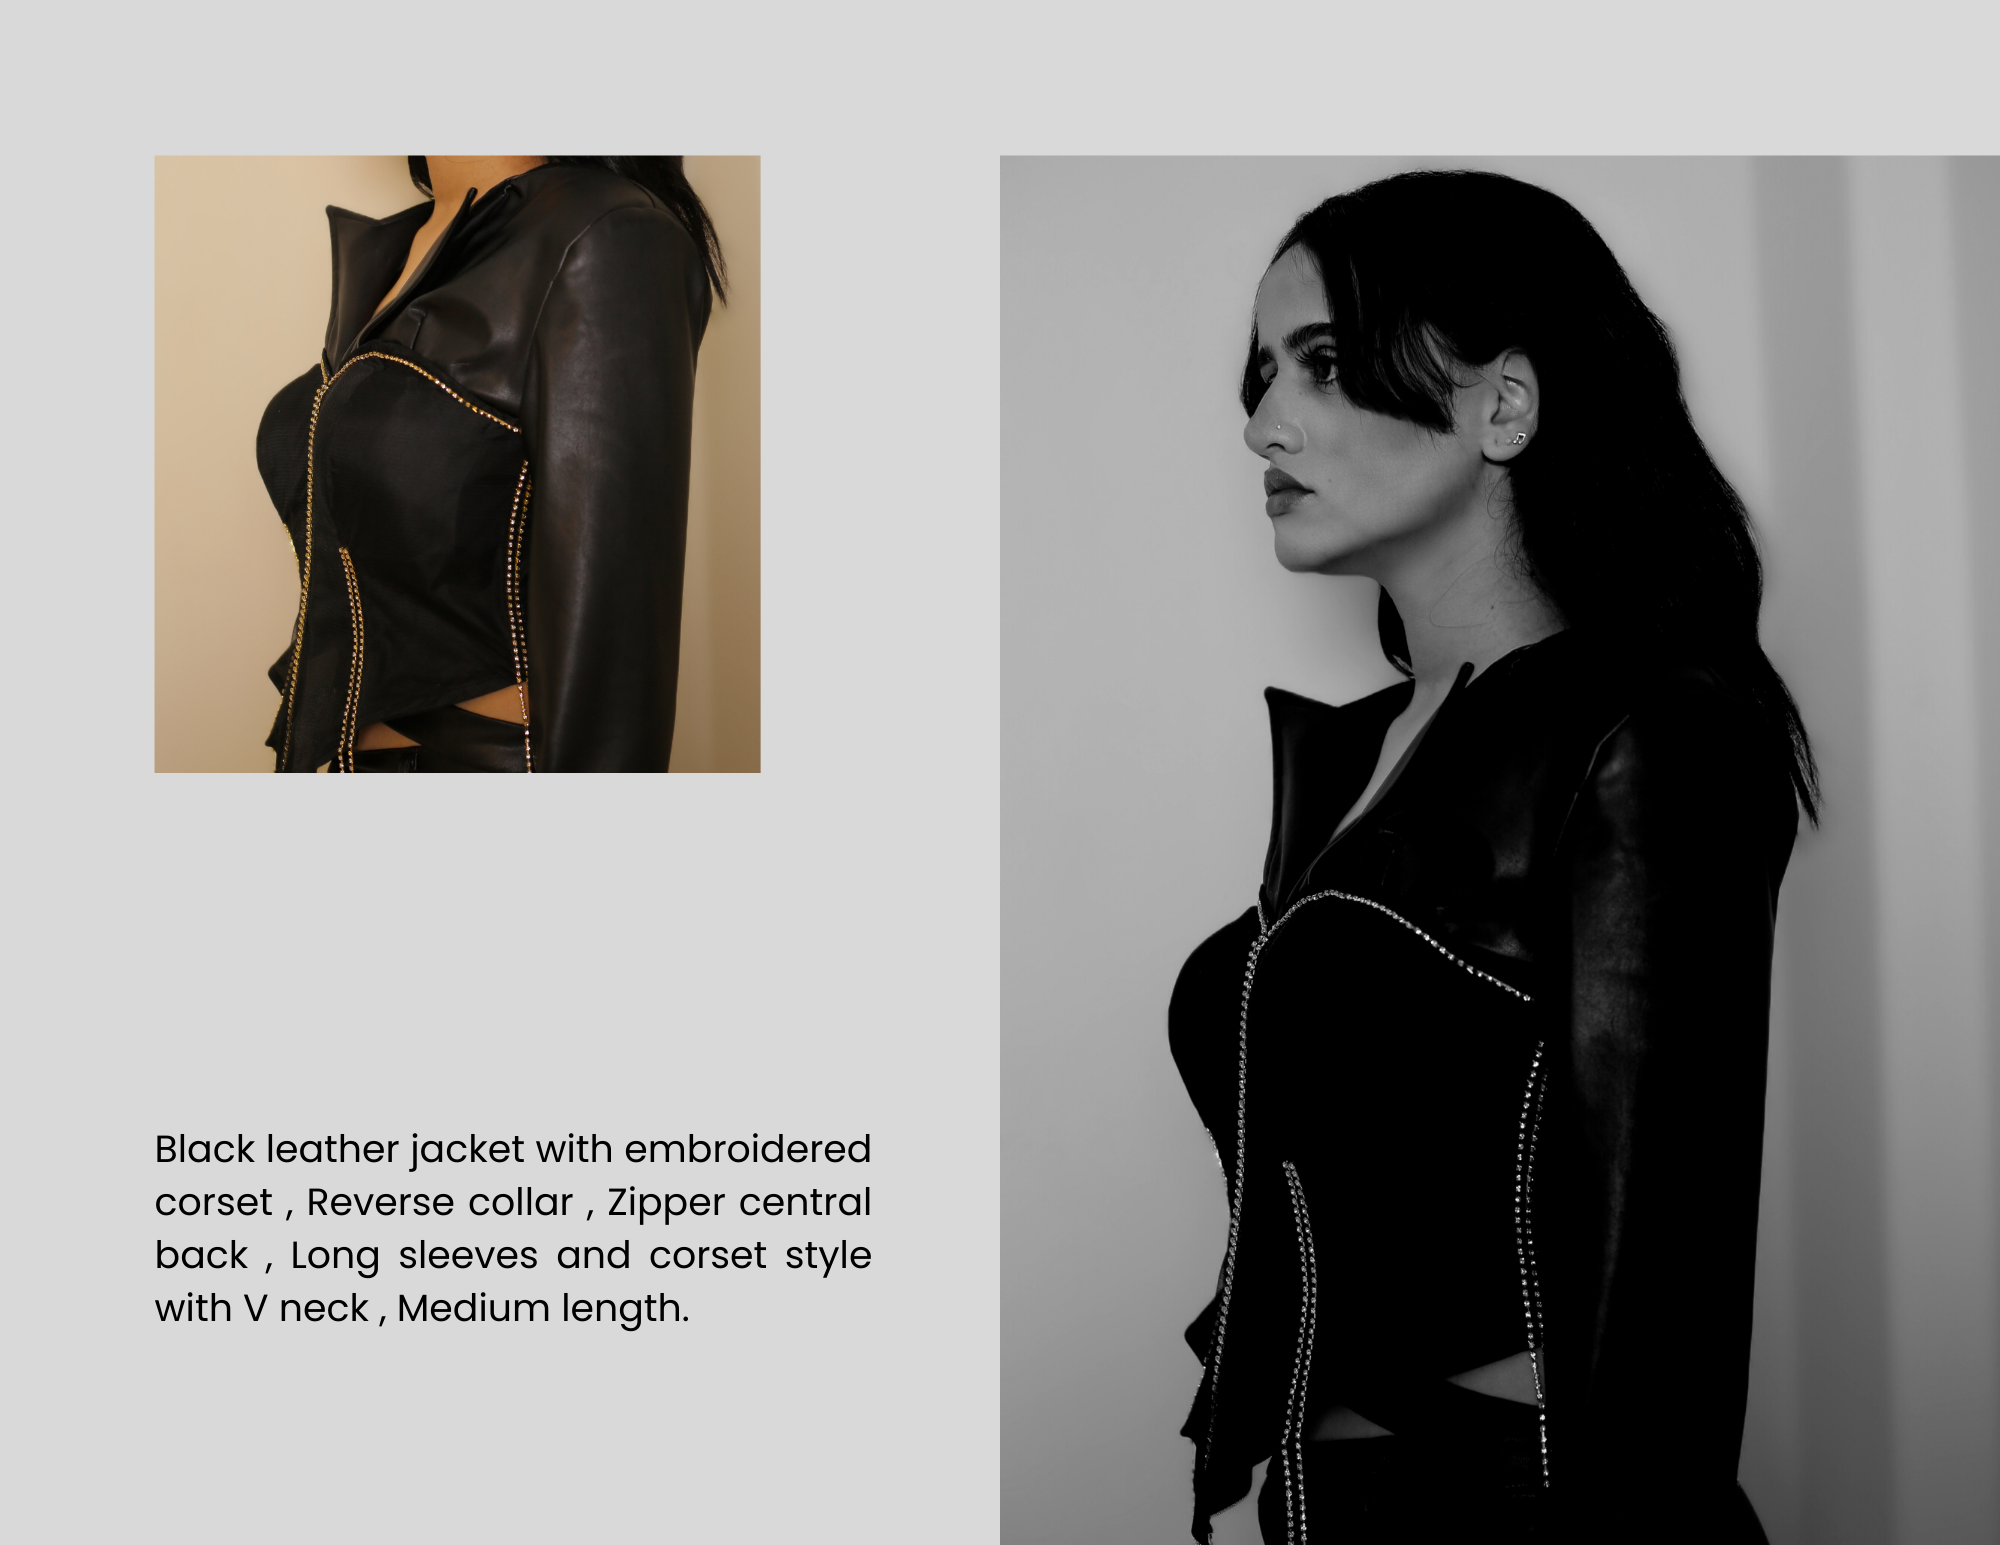 Black leather jacket with embroidered
corset , Reverse collar, Zipper central
back , Long sleeves and corset style
with V neck , Medium length.